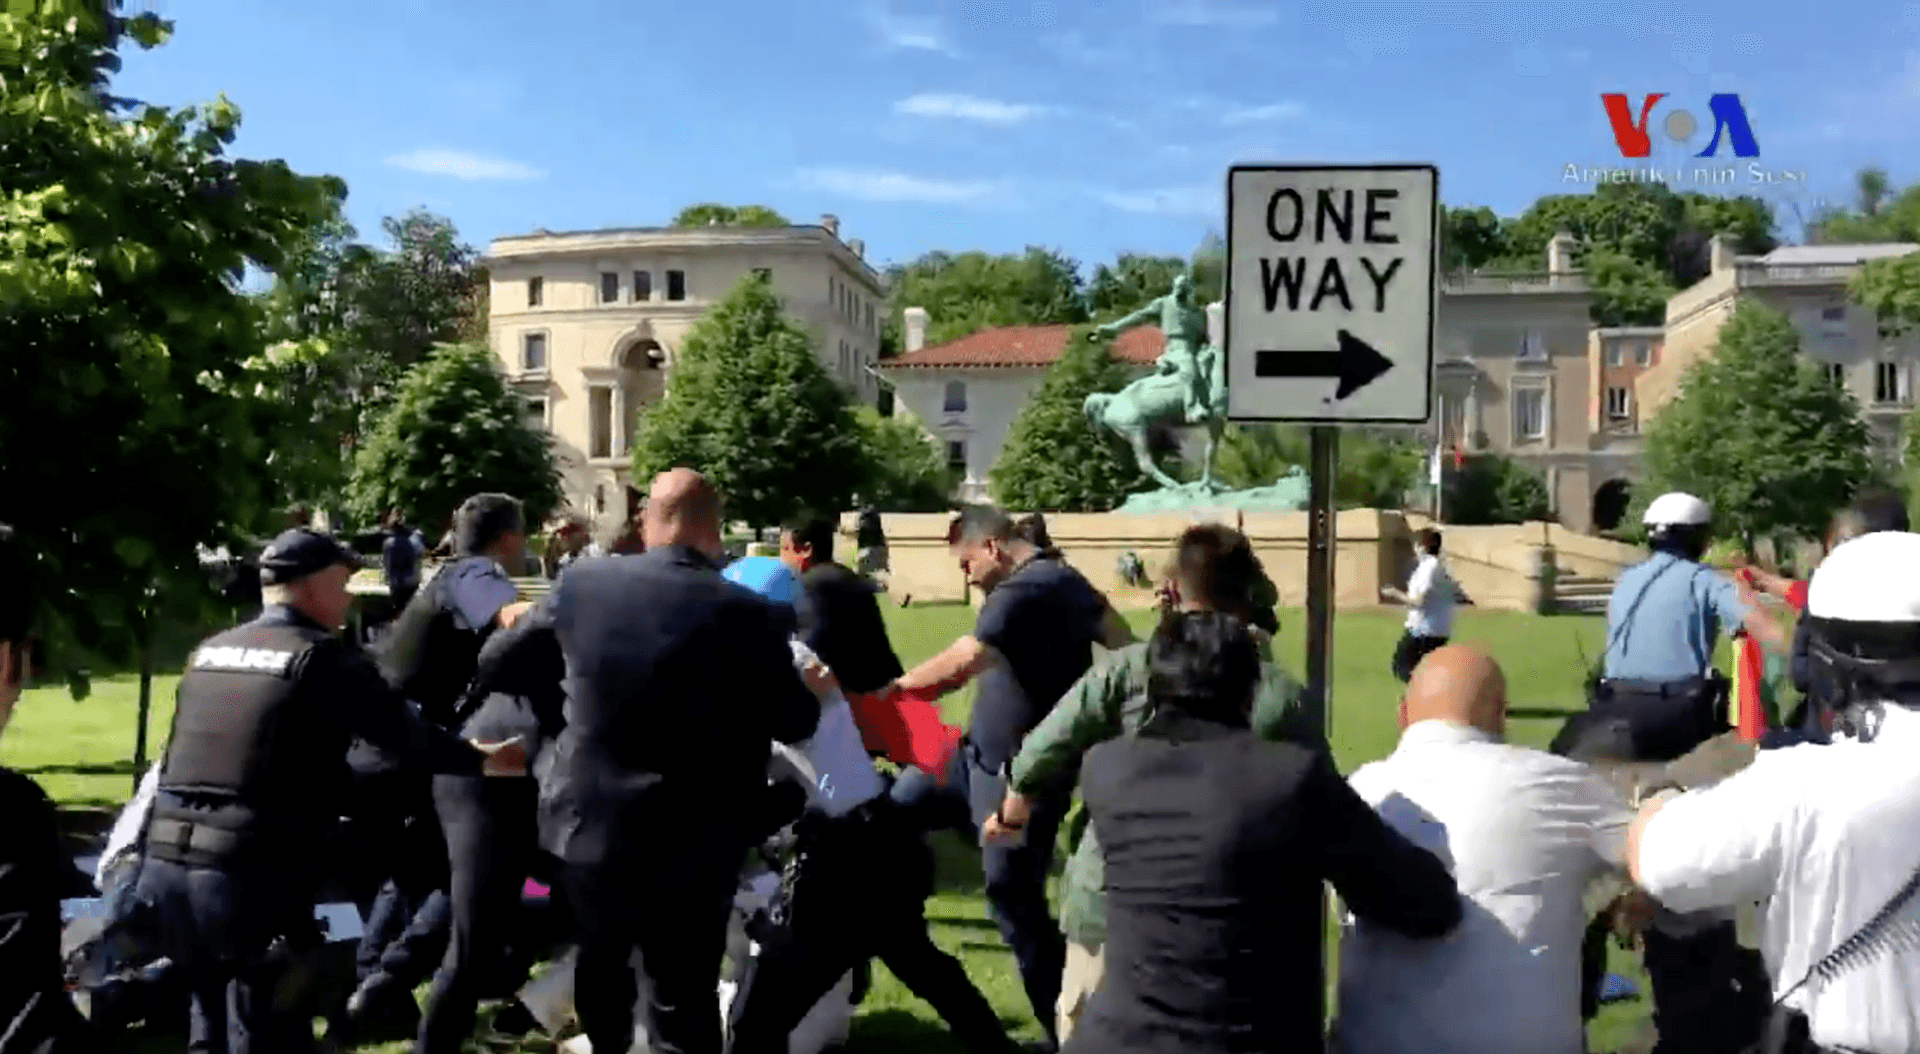 Opponents and supporters of the Turkish government beat each other up outside the residence of the Turkish ambassador to Washington, DC.